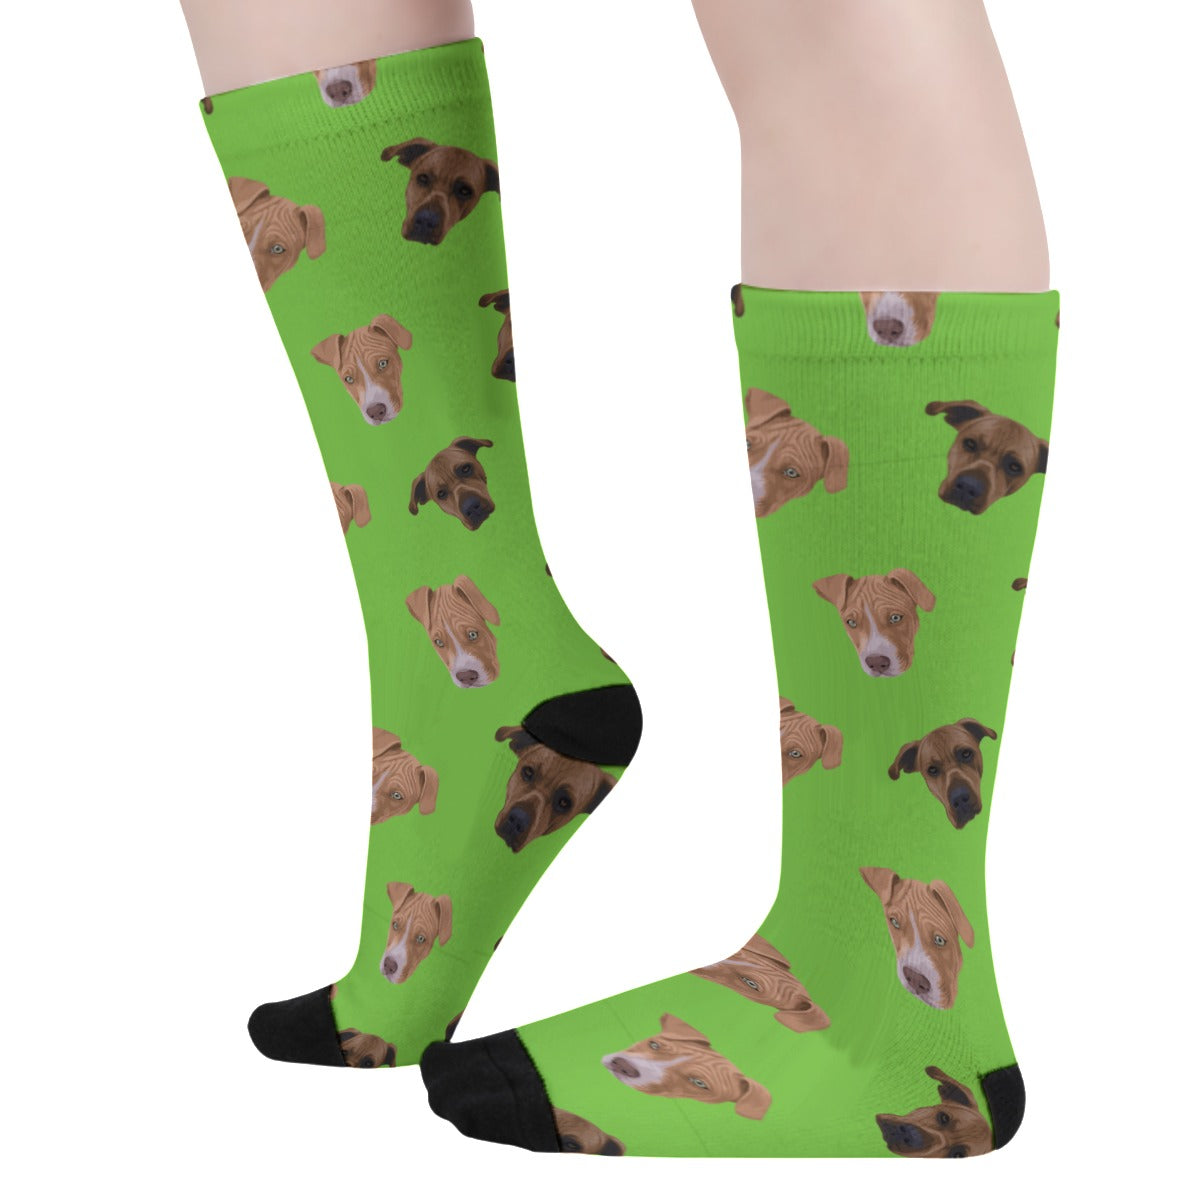 .A 2062 Steph Socks ORDER PAID - PREVIEW ONLY